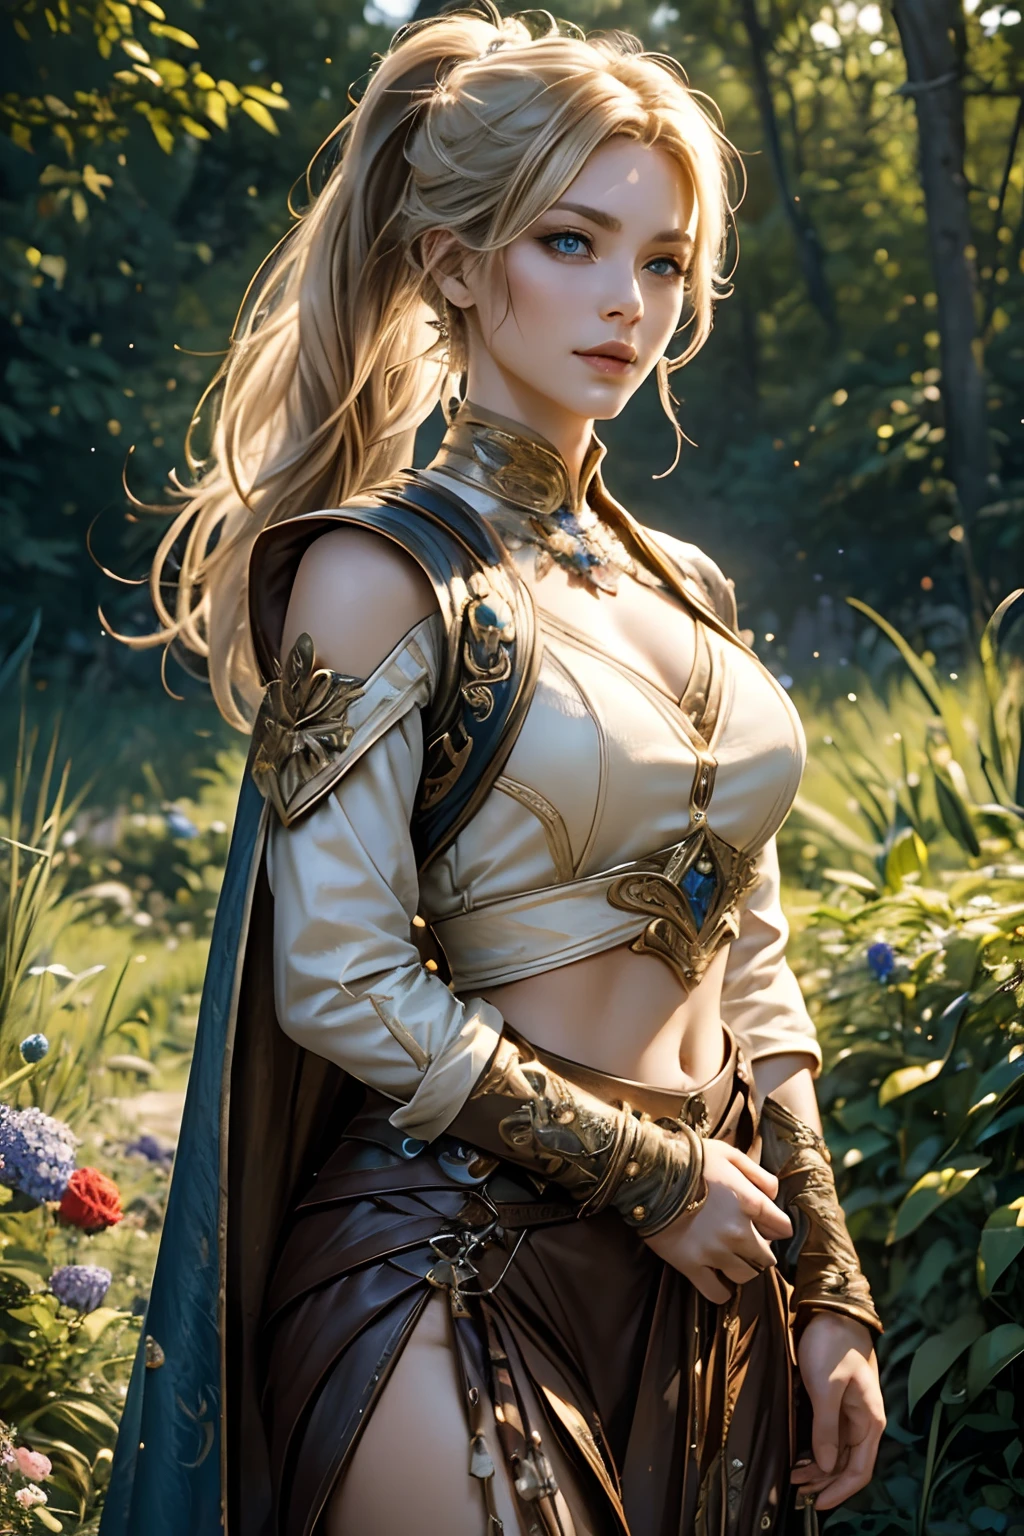 "(Best Quality,hight resolution,Masterpiece:1.2),beautiful detailed blue eyes,Stunning blonde with long hair, Tail, Hair gathered in a ponytail,Girl with a charming smile, Clothes made of tanned leather, briefs, leather armour, soft natural lighting,Flower garden background,bright colours,Fine Brush Stroke Technique,Accentuate the girl's joyful expression,A gentle breeze gently rustles her hair,Meticulous attention to facial features and hair strands,Realistic skin tones and textures, A keen eye, Battle Maiden, Figure Warfare, athletic build, musculature, long leges, Long Range